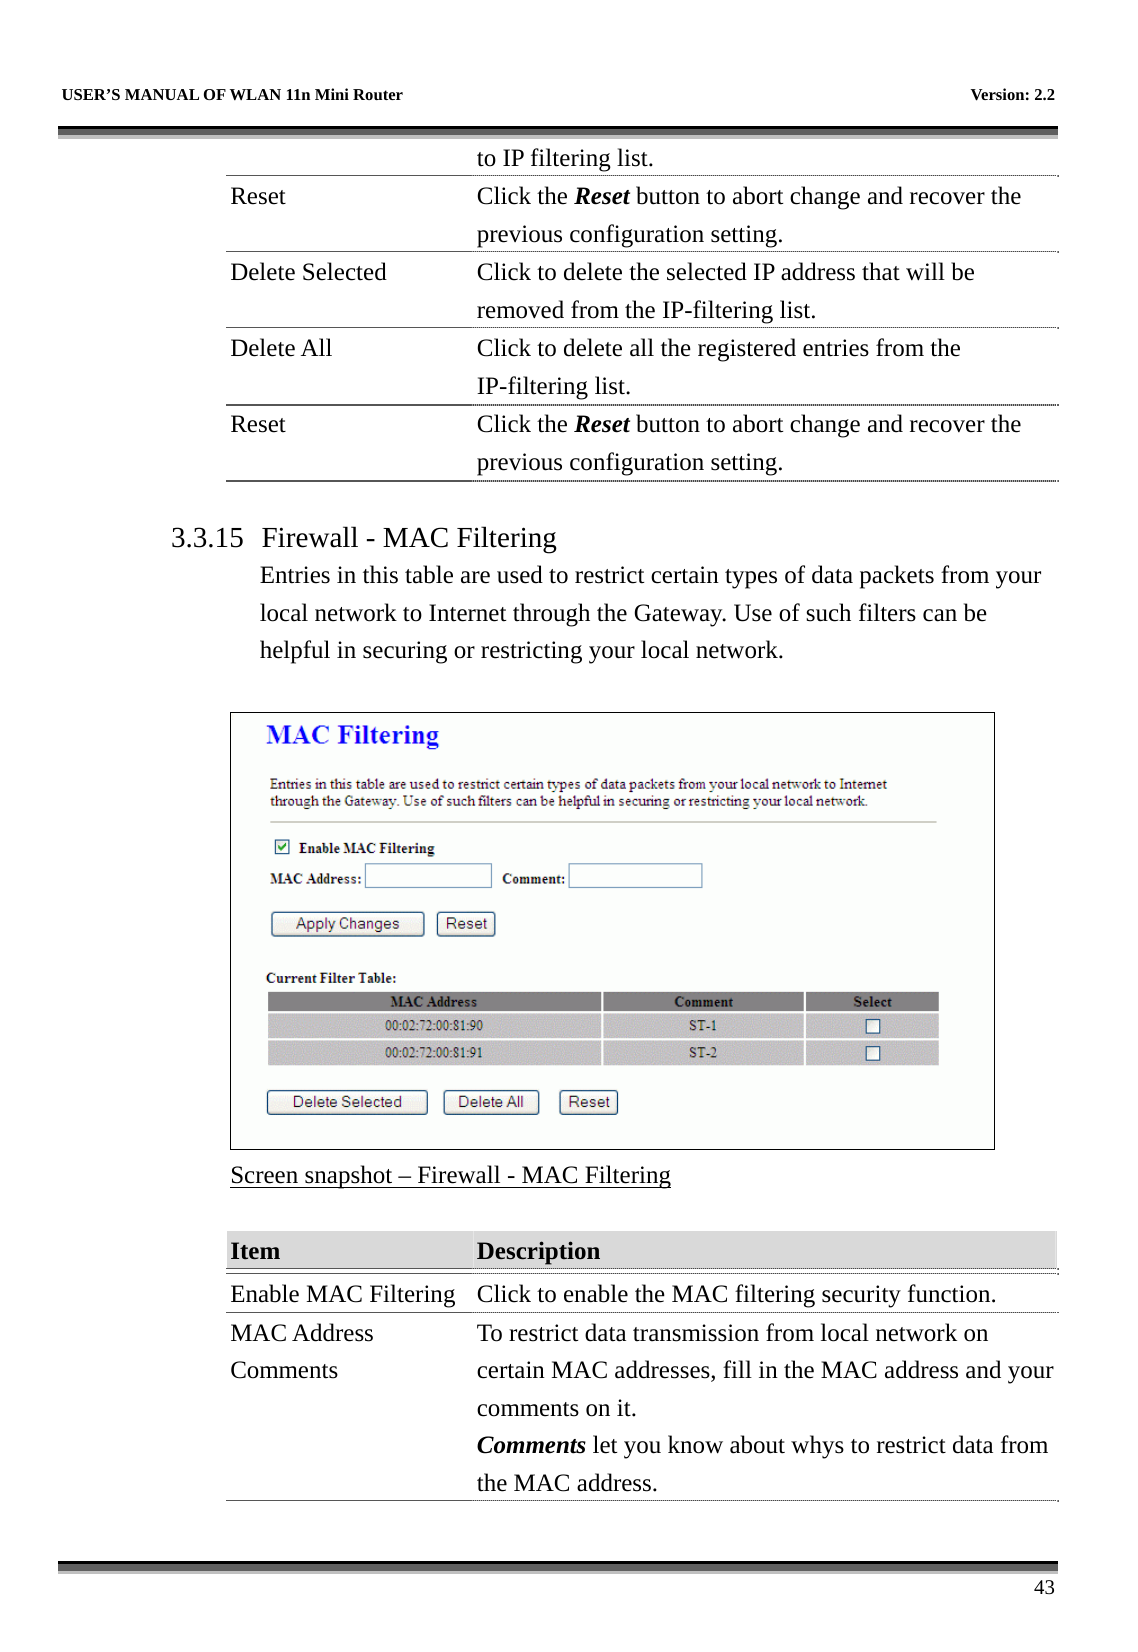   USER’S MANUAL OF WLAN 11n Mini Router    Version: 2.2      43 to IP filtering list. Reset Click the Reset button to abort change and recover the previous configuration setting. Delete Selected  Click to delete the selected IP address that will be removed from the IP-filtering list. Delete All  Click to delete all the registered entries from the IP-filtering list.   Reset Click the Reset button to abort change and recover the previous configuration setting.  3.3.15  Firewall - MAC Filtering Entries in this table are used to restrict certain types of data packets from your local network to Internet through the Gateway. Use of such filters can be helpful in securing or restricting your local network.   Screen snapshot – Firewall - MAC Filtering  Item  Description   Enable MAC Filtering  Click to enable the MAC filtering security function. MAC Address Comments To restrict data transmission from local network on certain MAC addresses, fill in the MAC address and your comments on it. Comments let you know about whys to restrict data from the MAC address. 